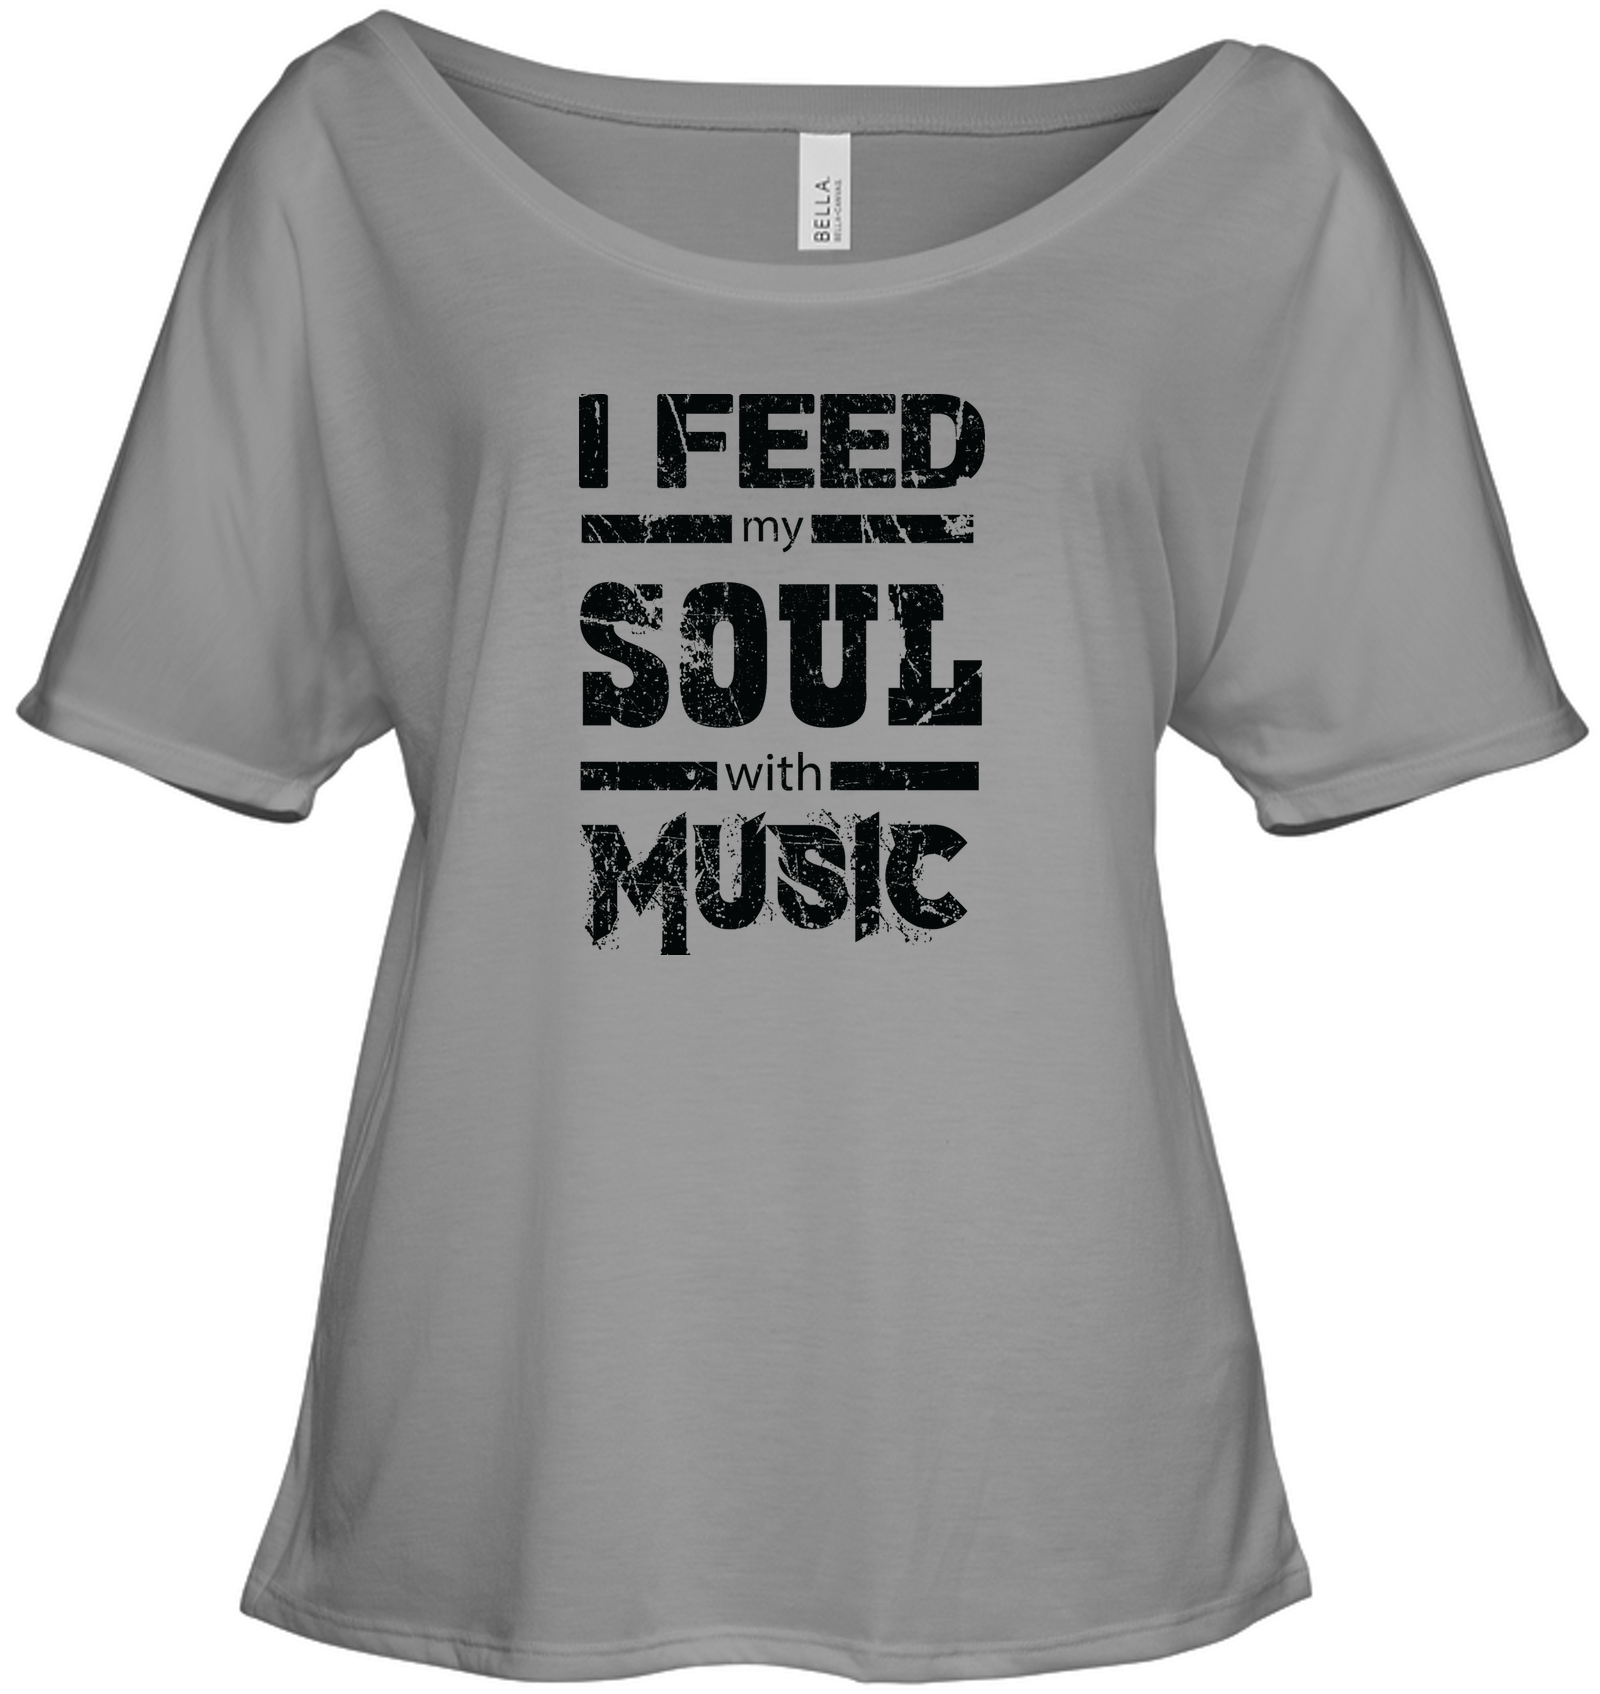 I Feed My Soul With Music - Bella + Canvas Women's Slouchy Tee